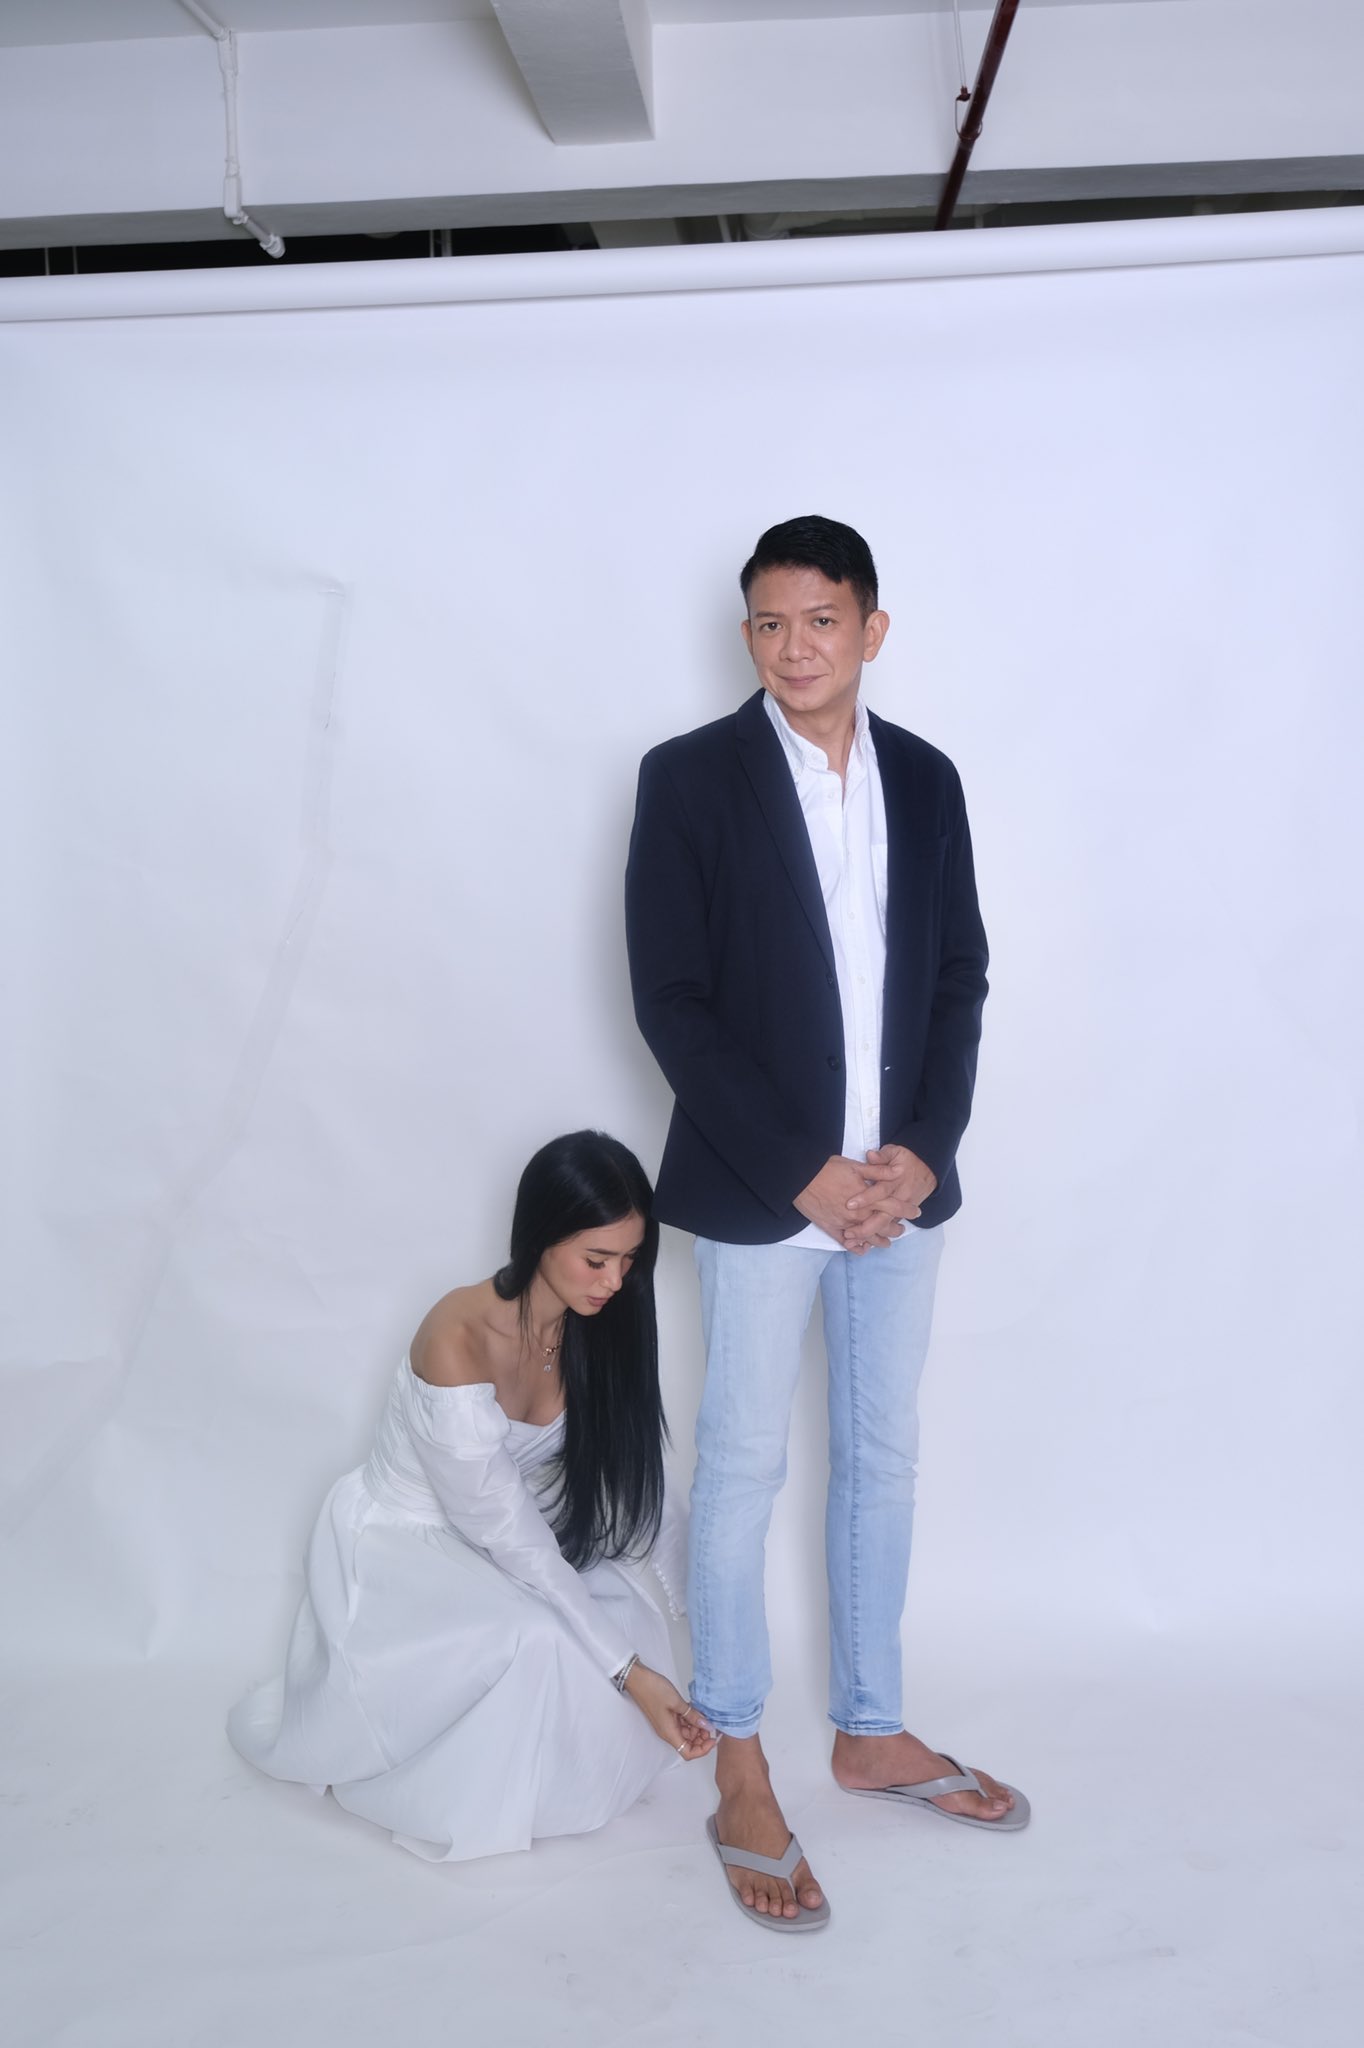 Chiz Escudero being styled by Heart Evangelista in a photoshoot